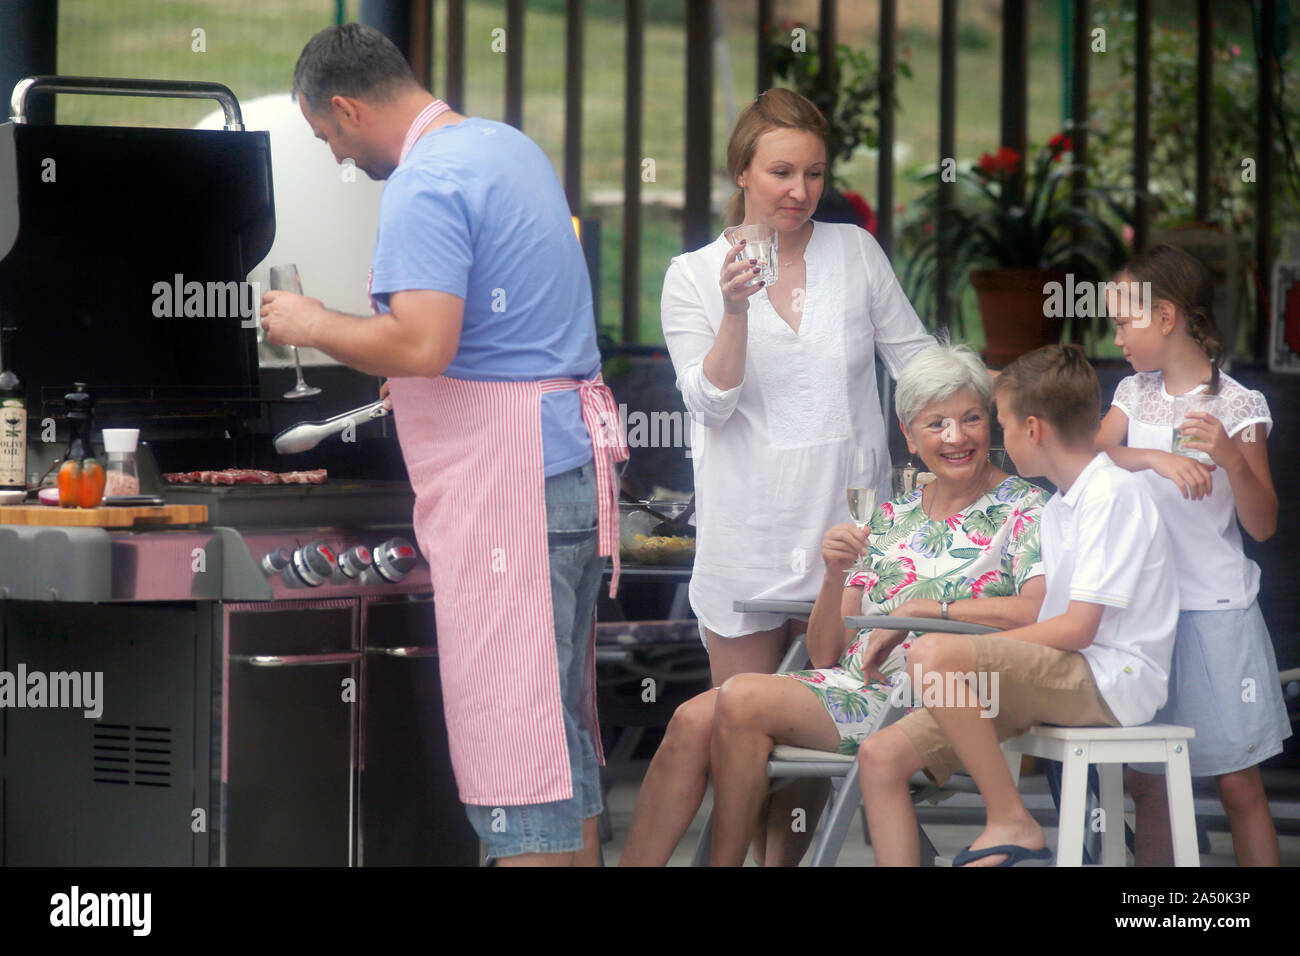 Familie am Grill Stockfoto